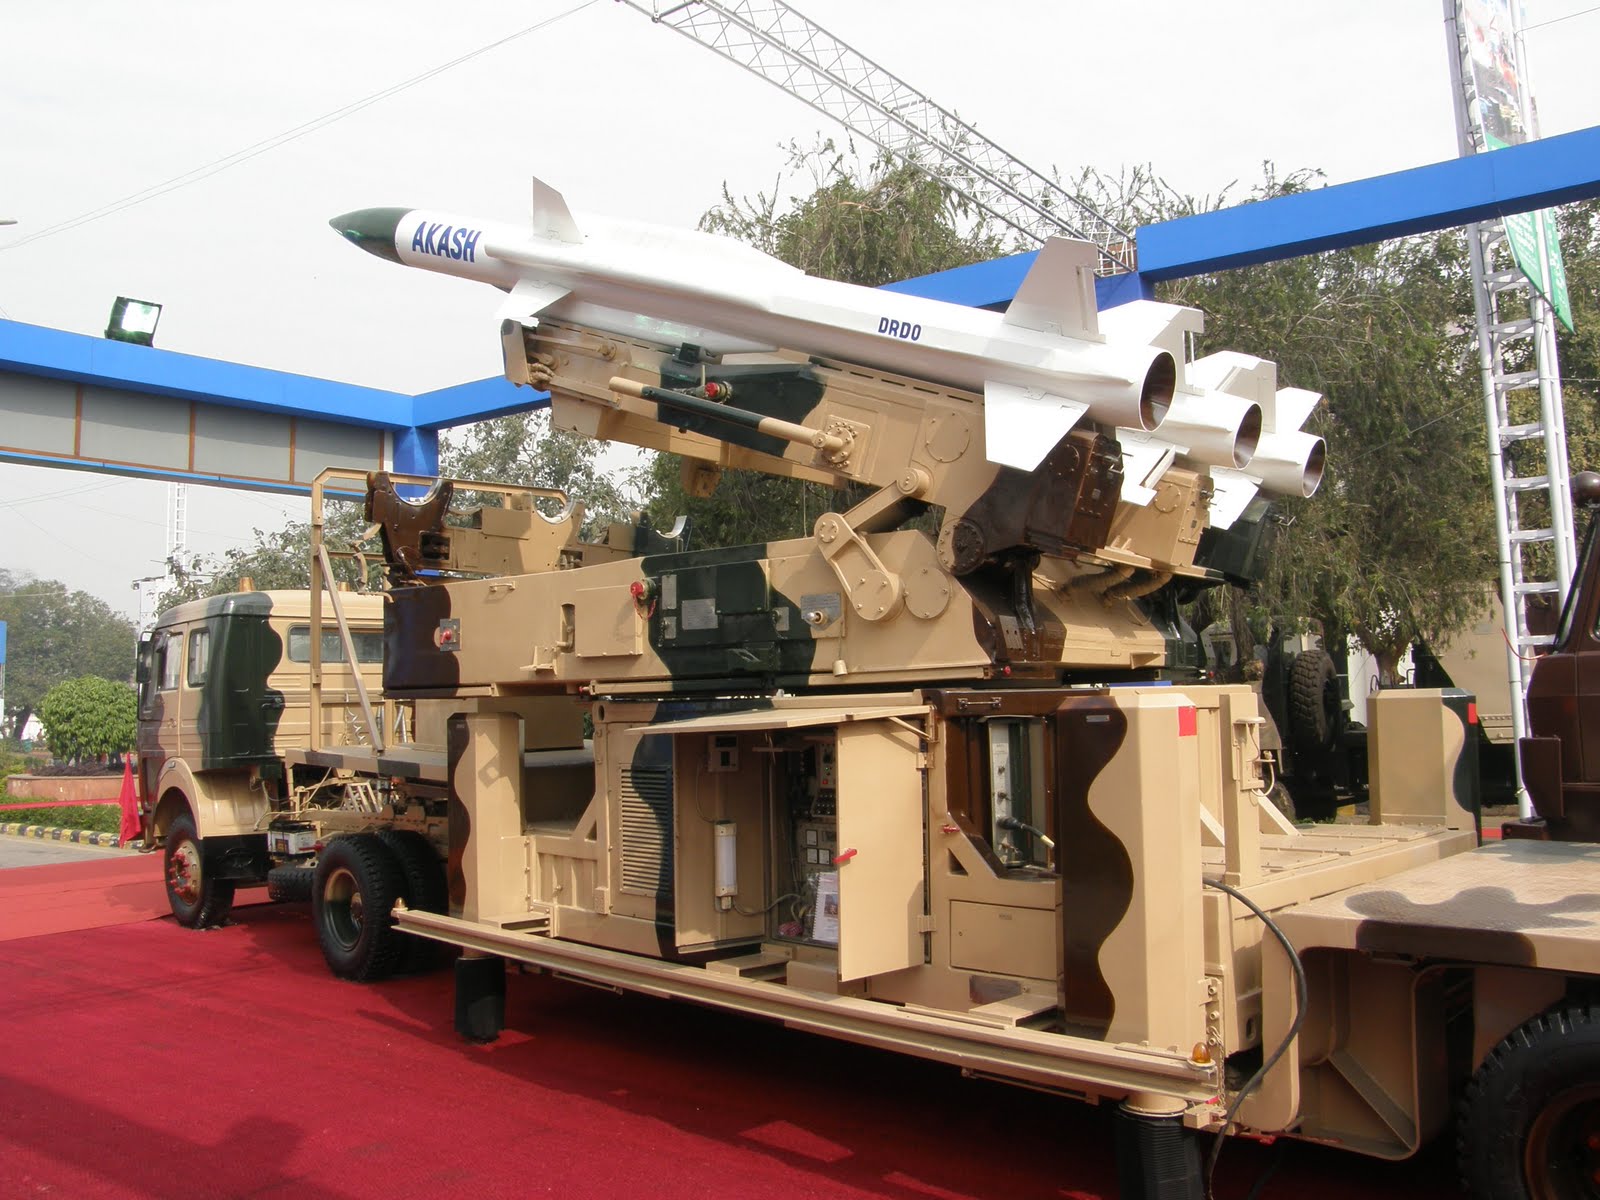 Akash_surface-to-air_defense_missile_system_India_Indian_army_military_equipment_defense_industry_001.JPG